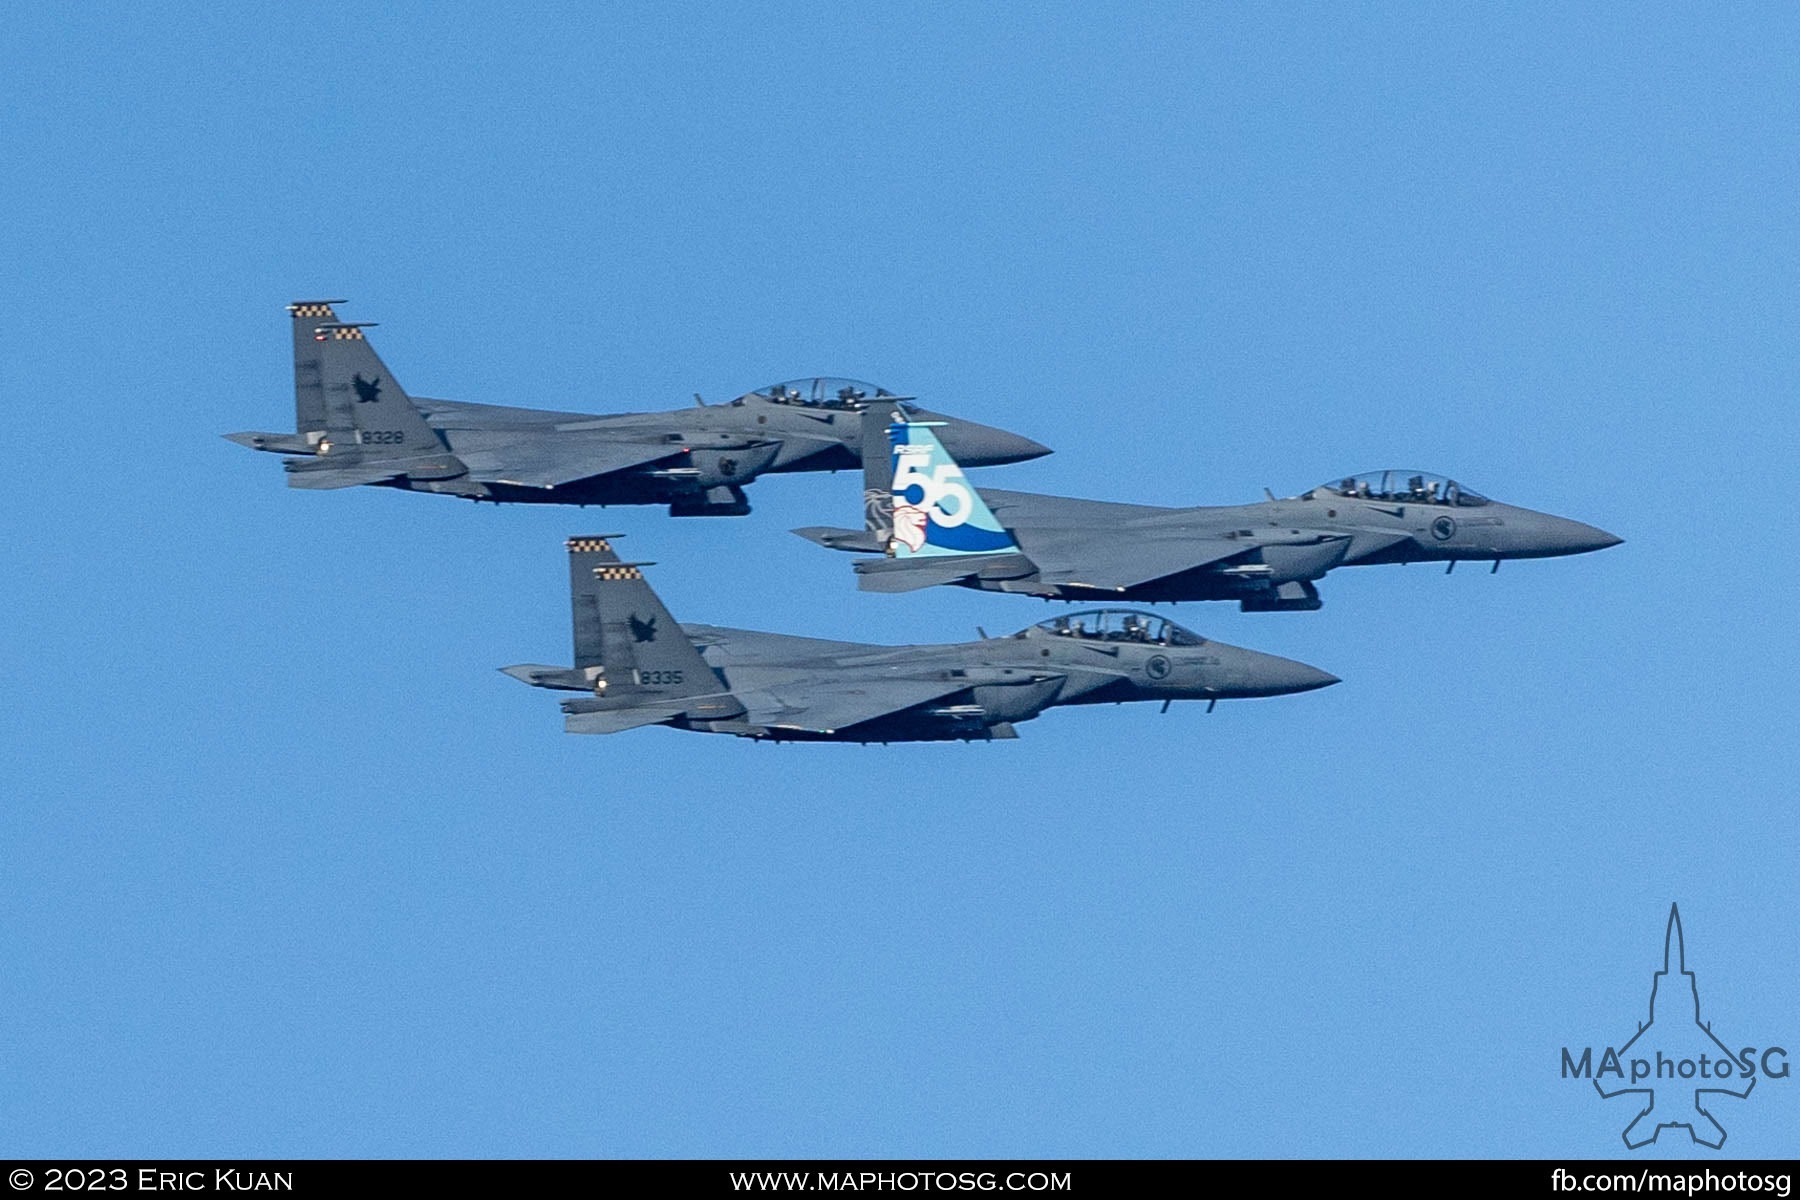 3 RSAF F-15SG follows closely behind as part of the Island Flypast.